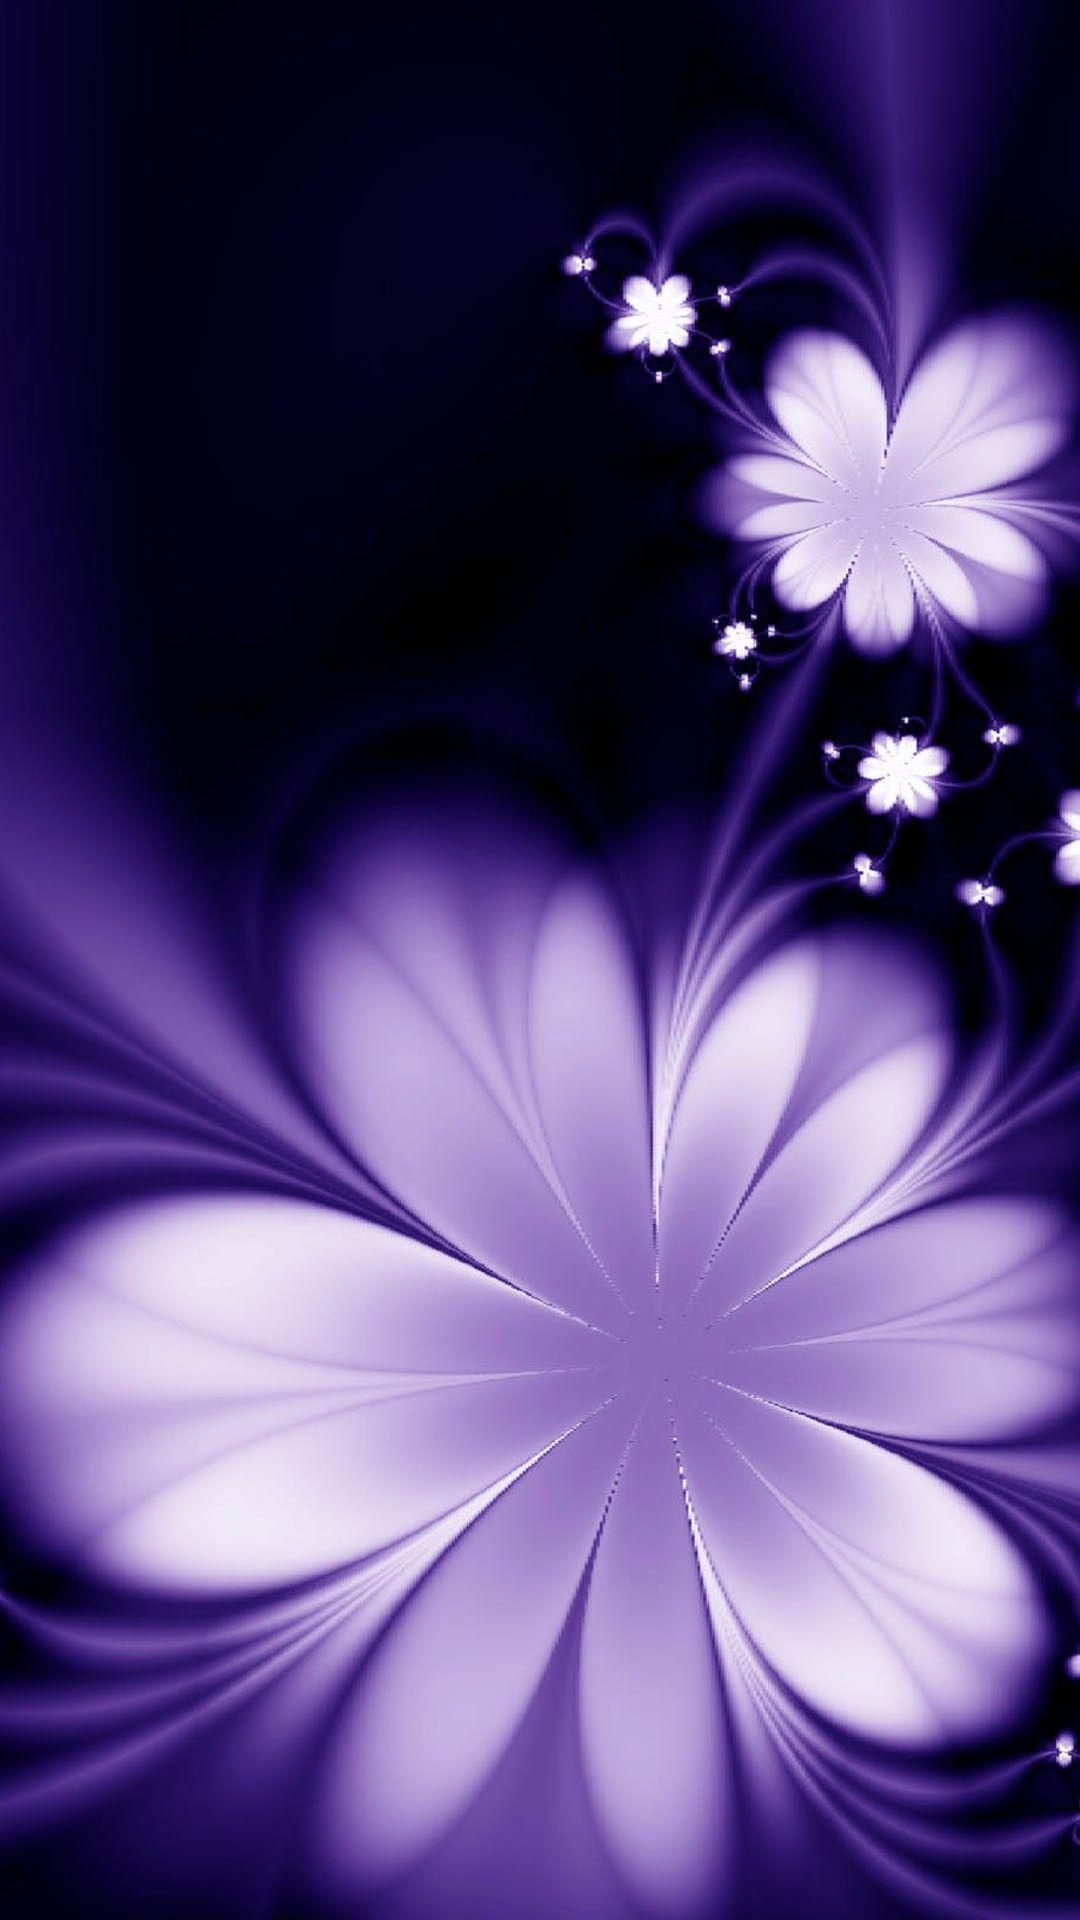 Artistic Beautiful Flower Patterns HD 1080p Mobile Background